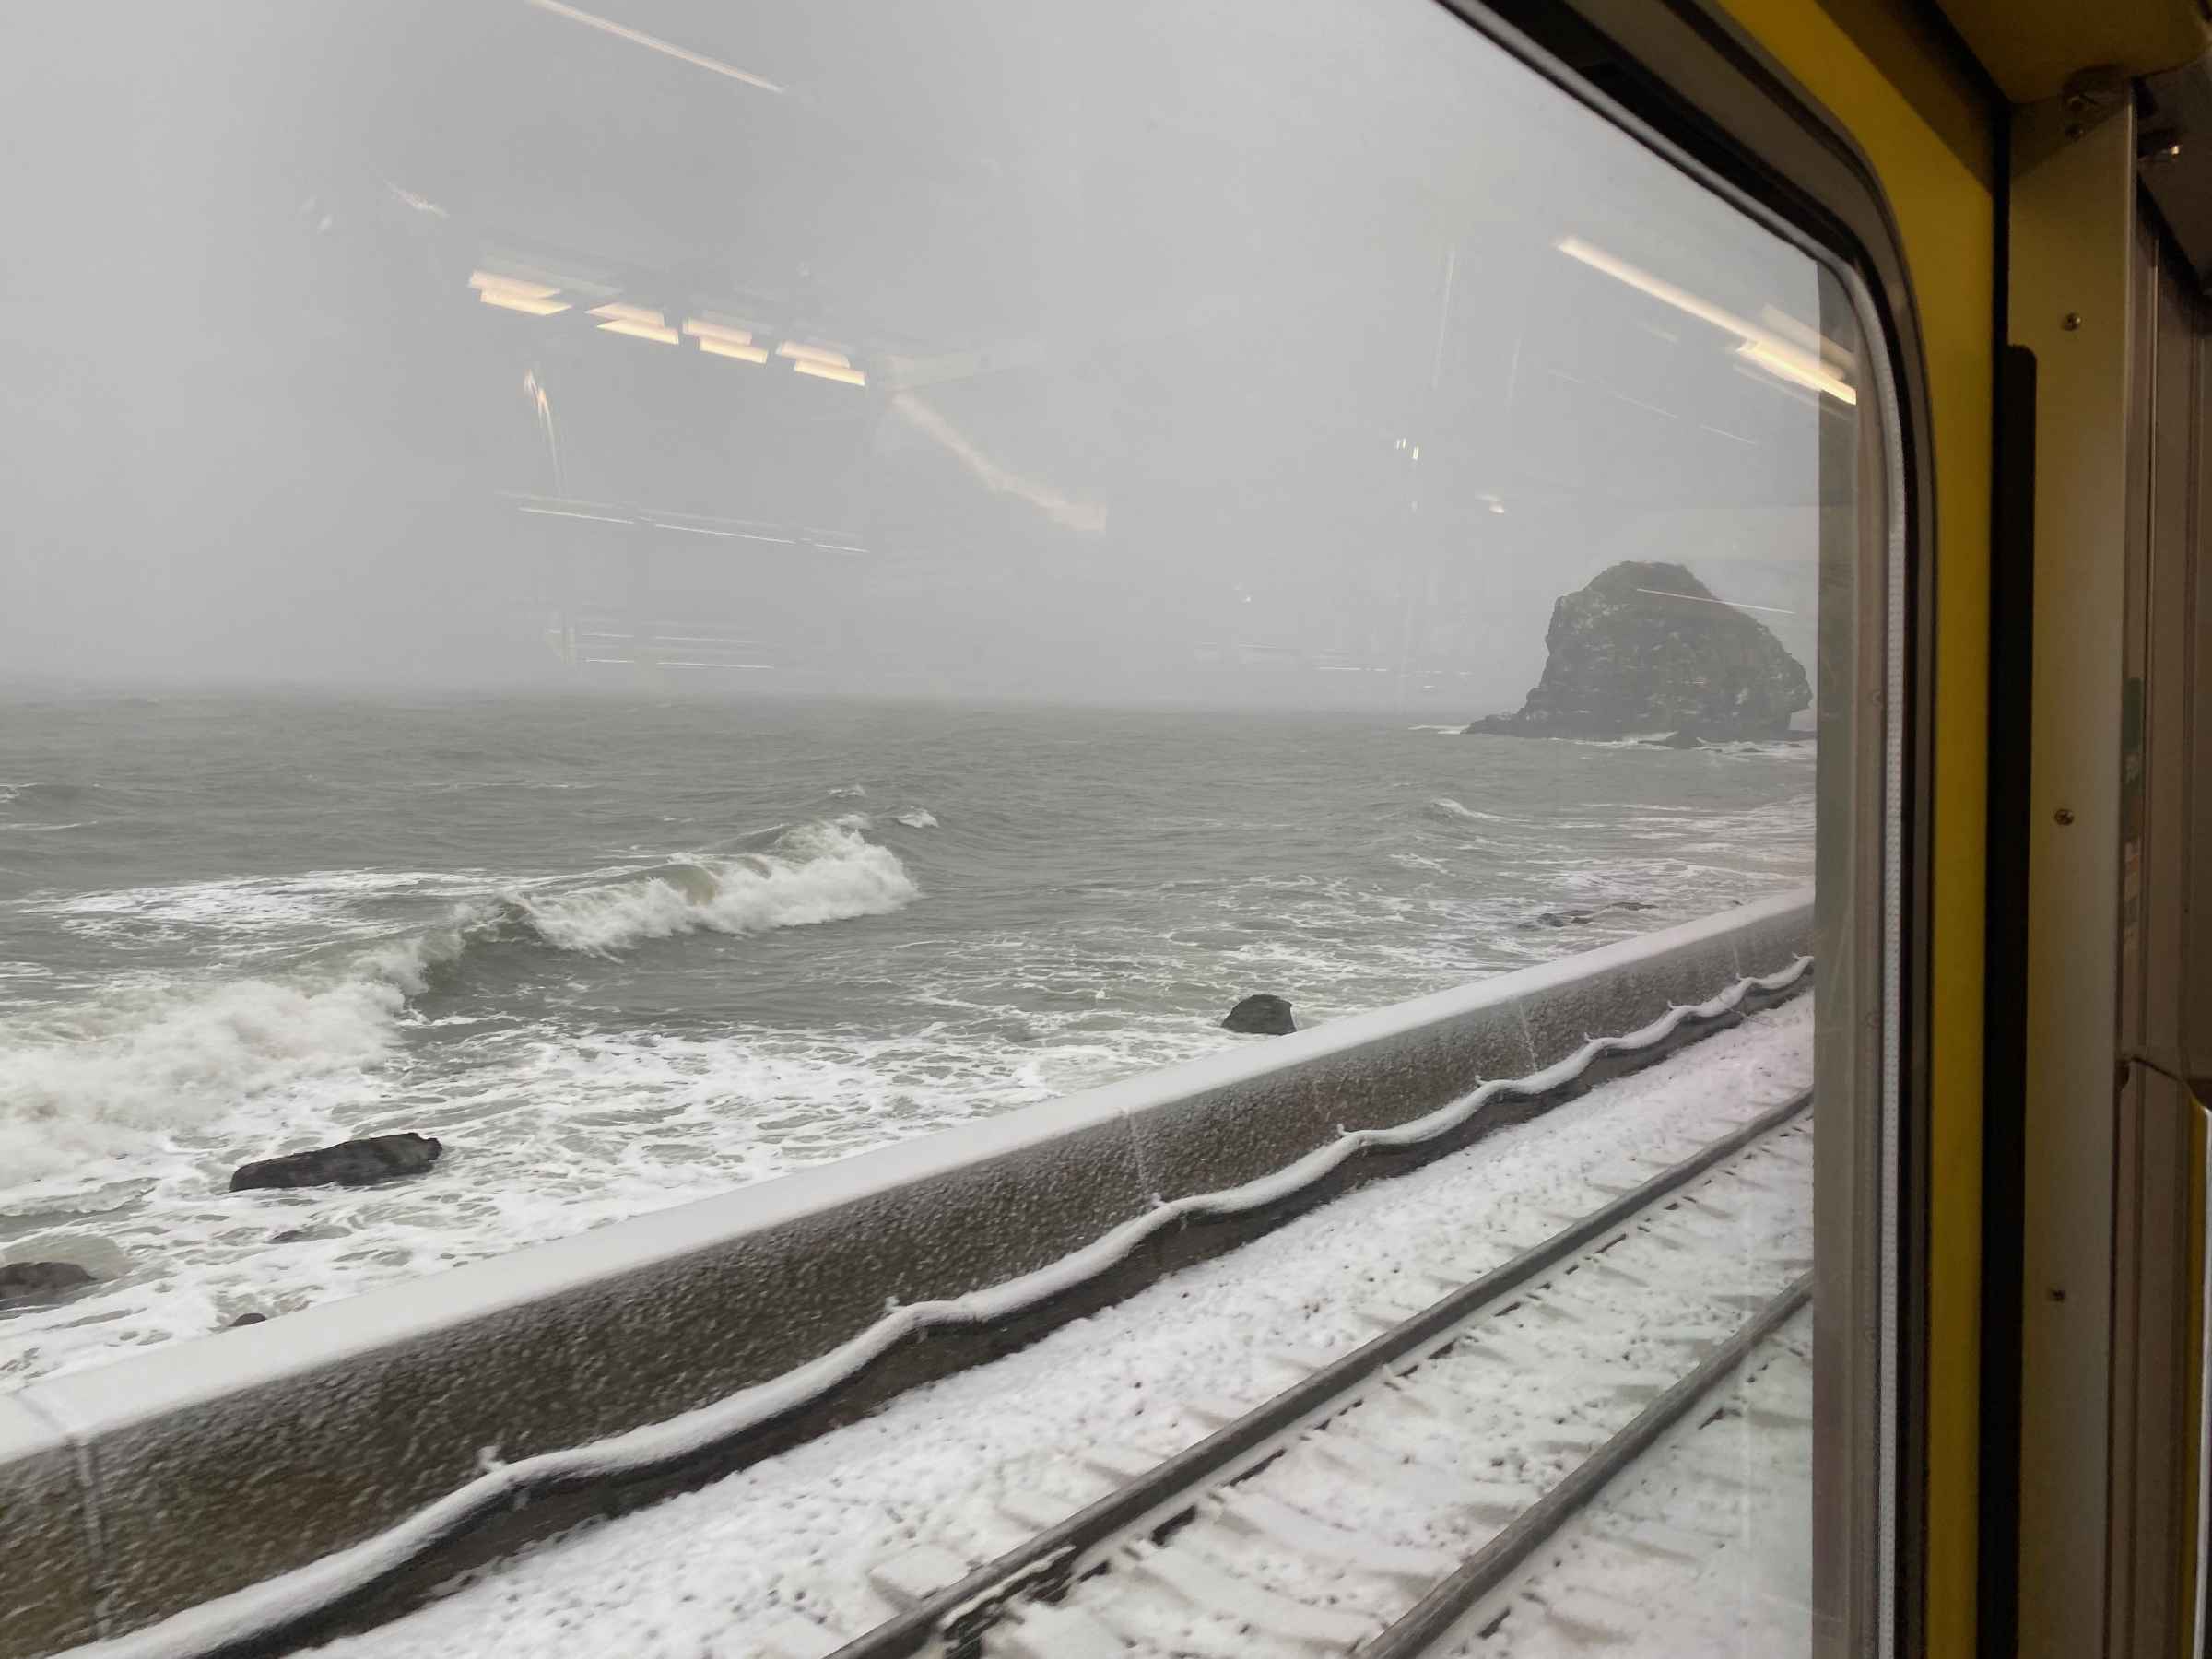 Photo of snow by the sea waves from a train